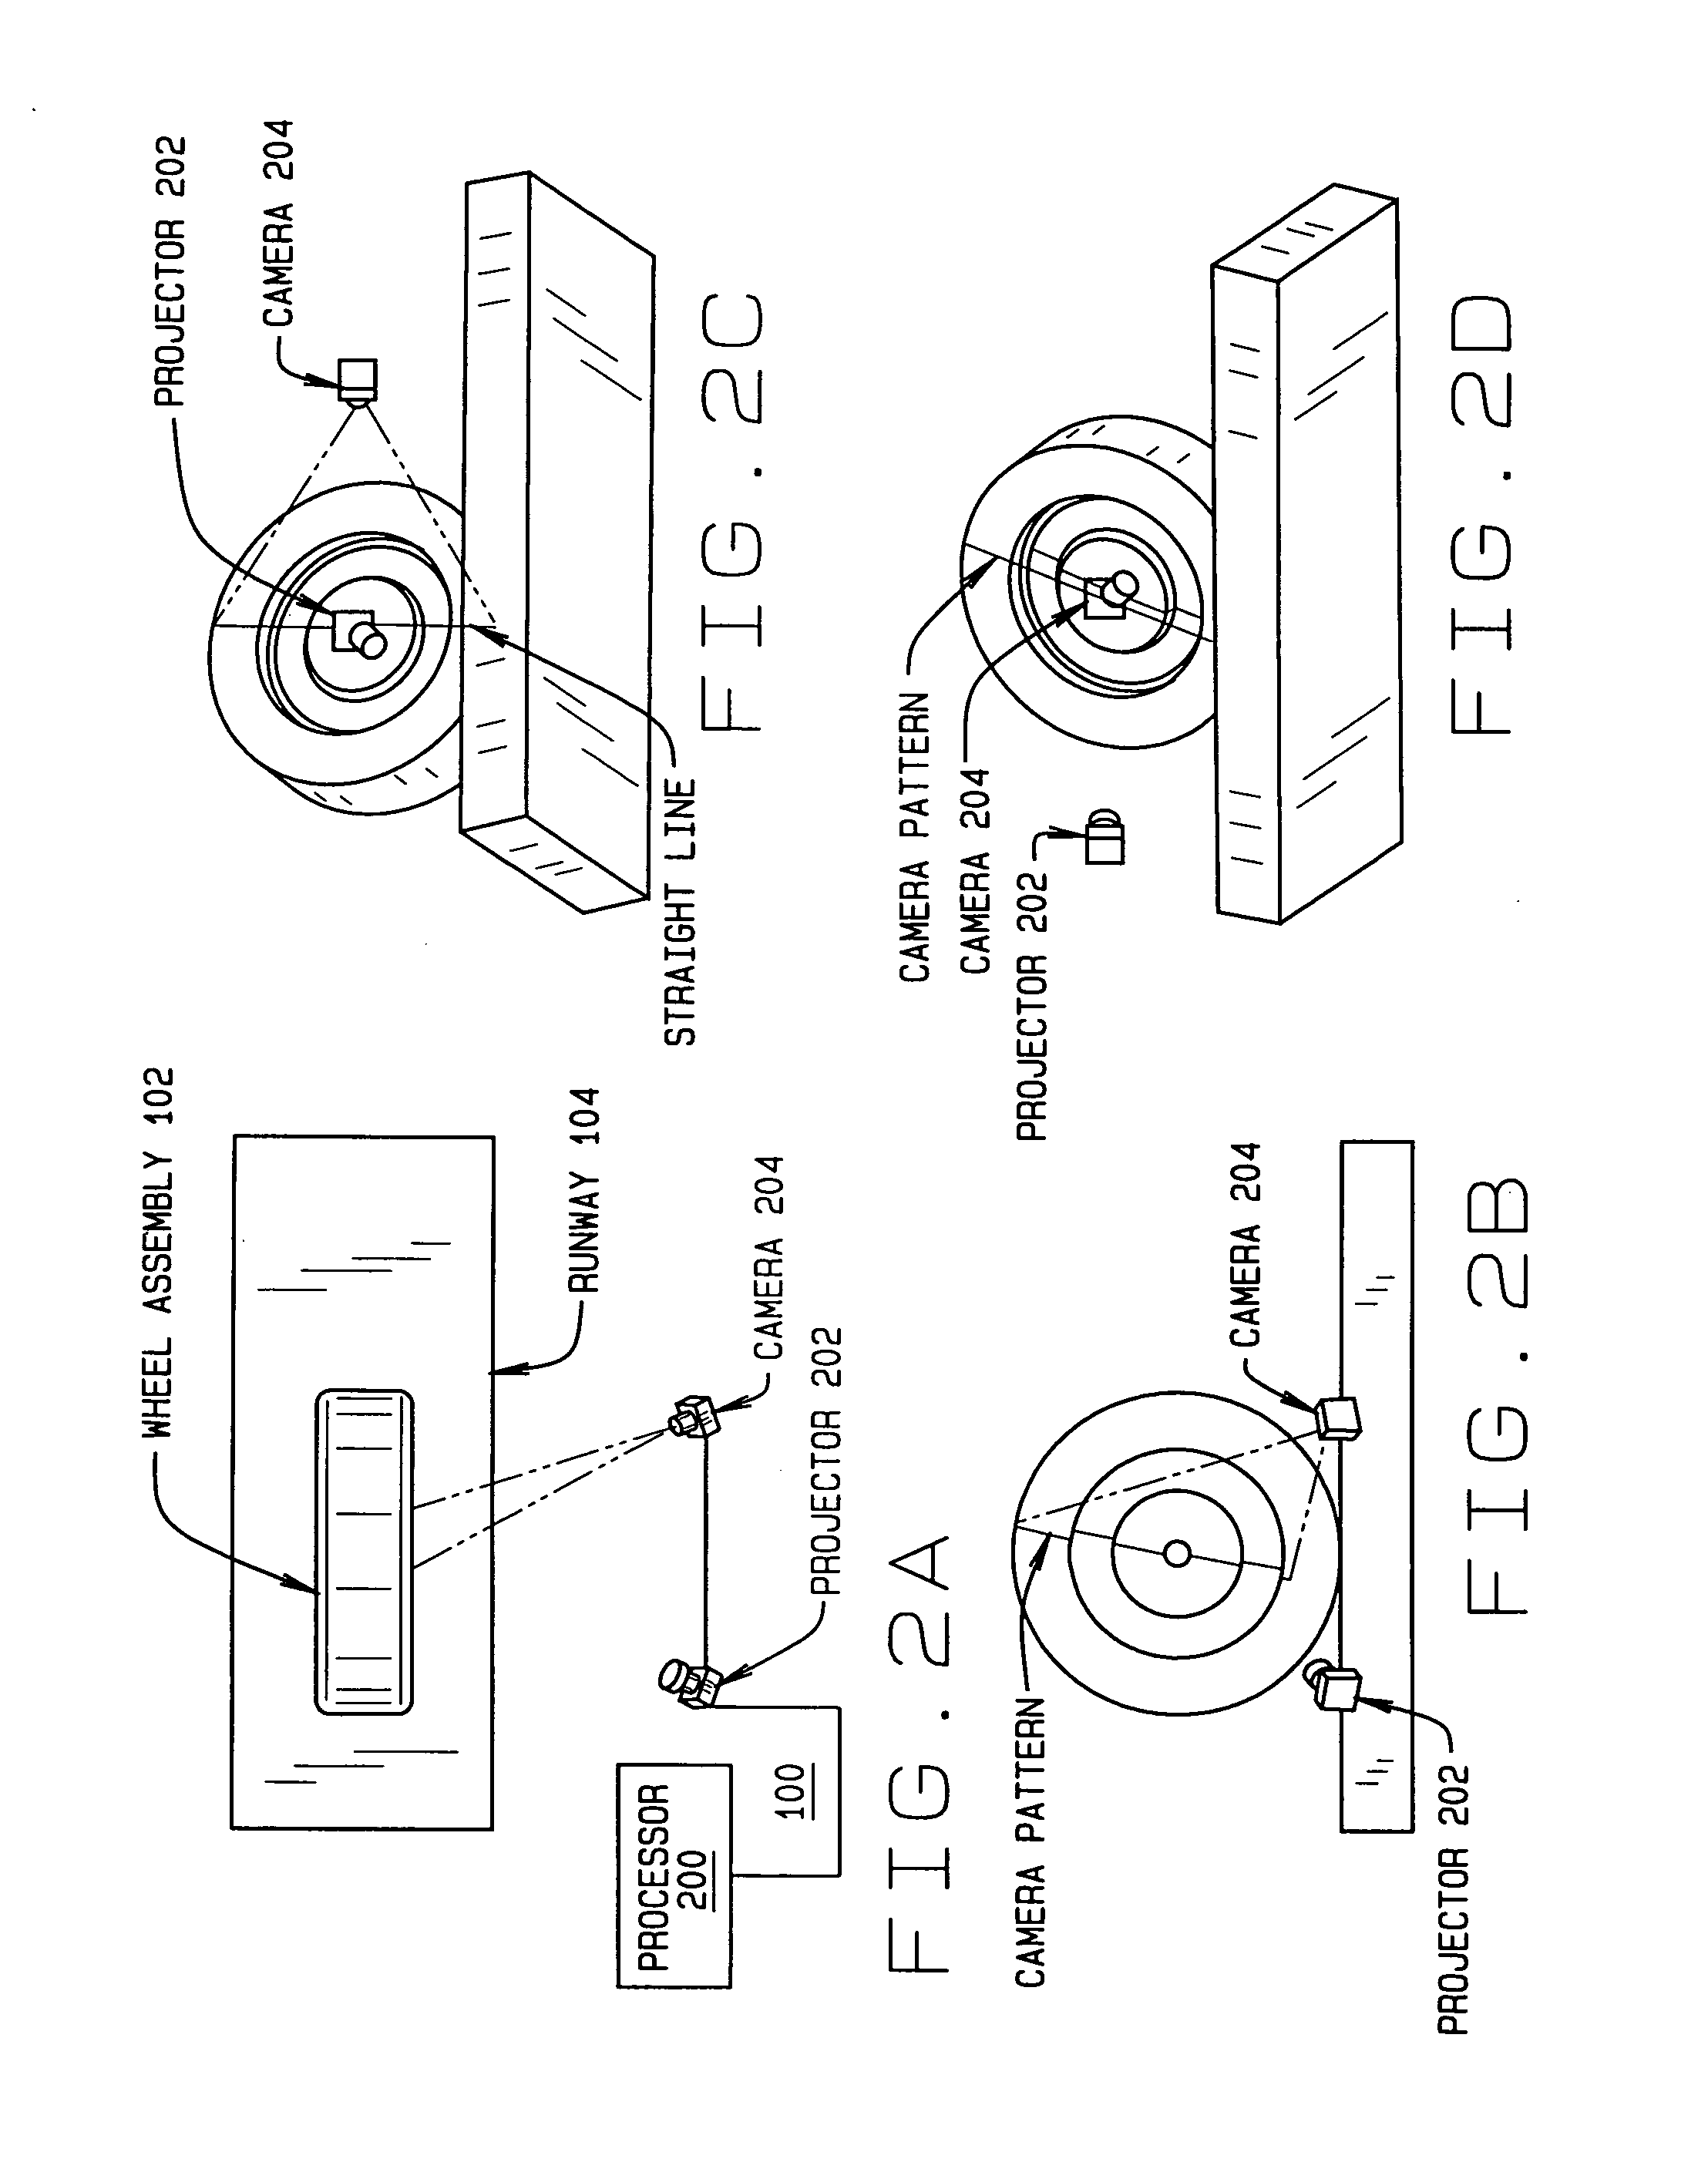 Method and Apparatus for Wheel Alignment System Target Projection and Illumination